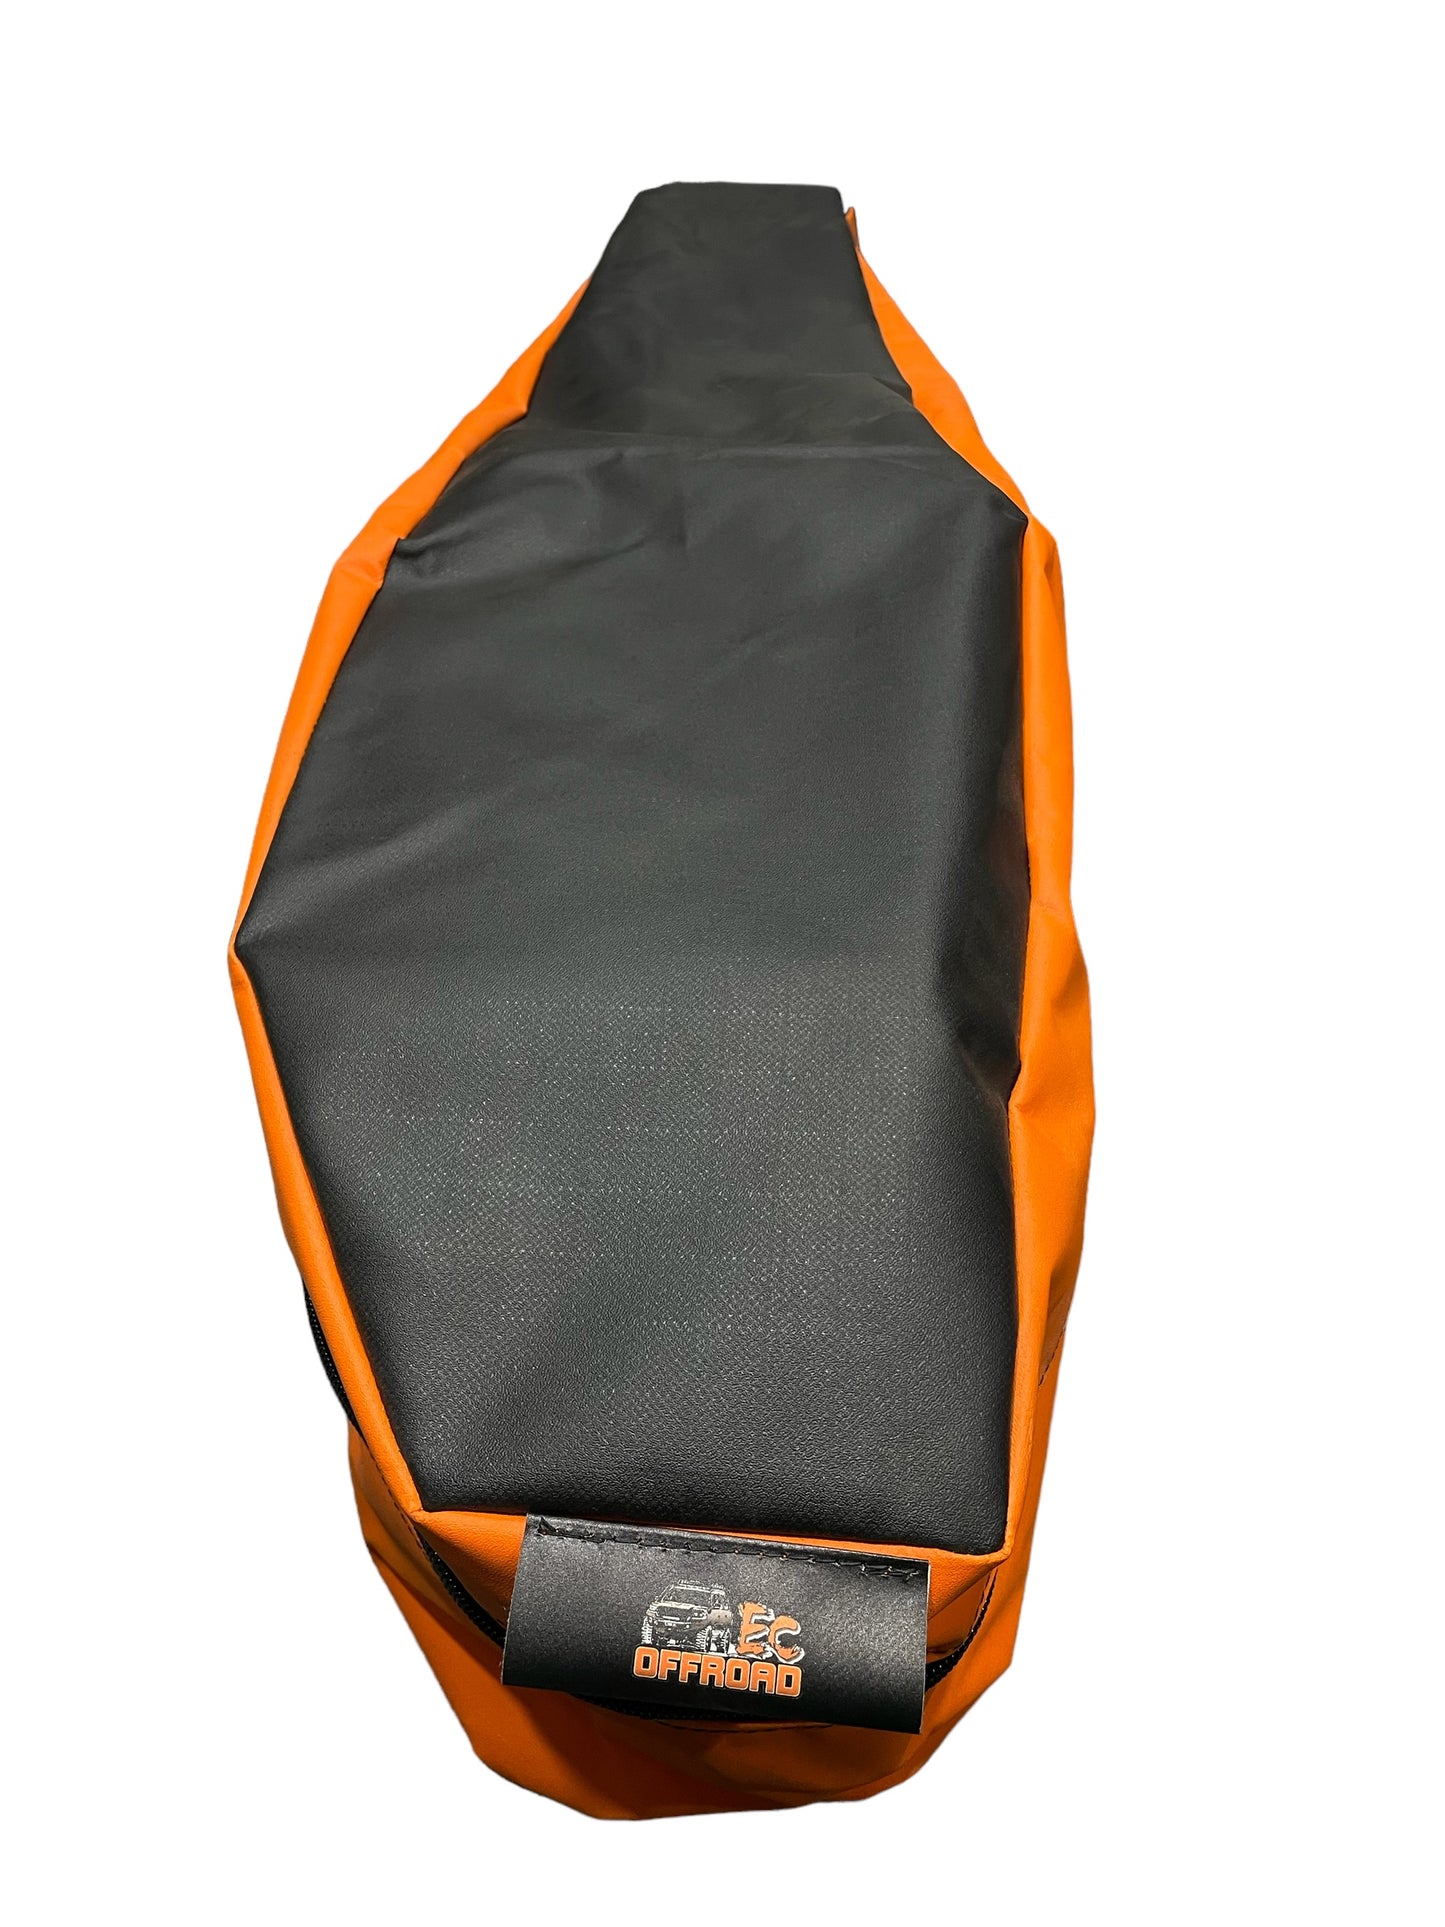 EC Offroad Chainsaw Bags